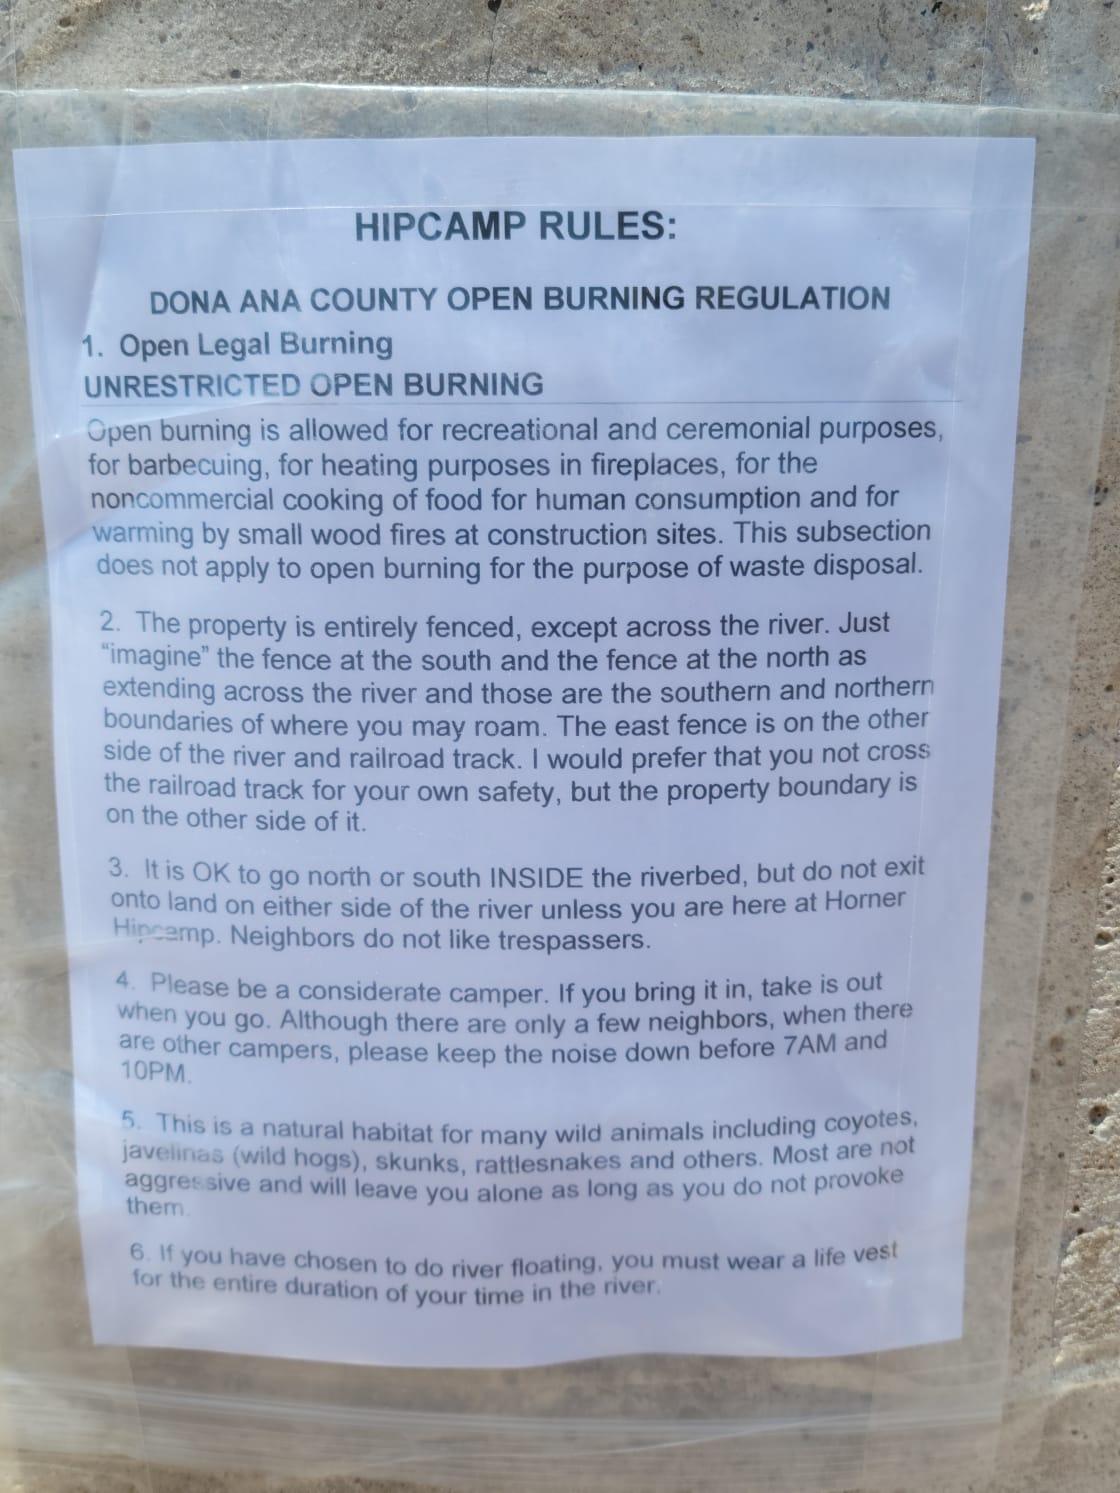 Rules clearly posted for campers safety!